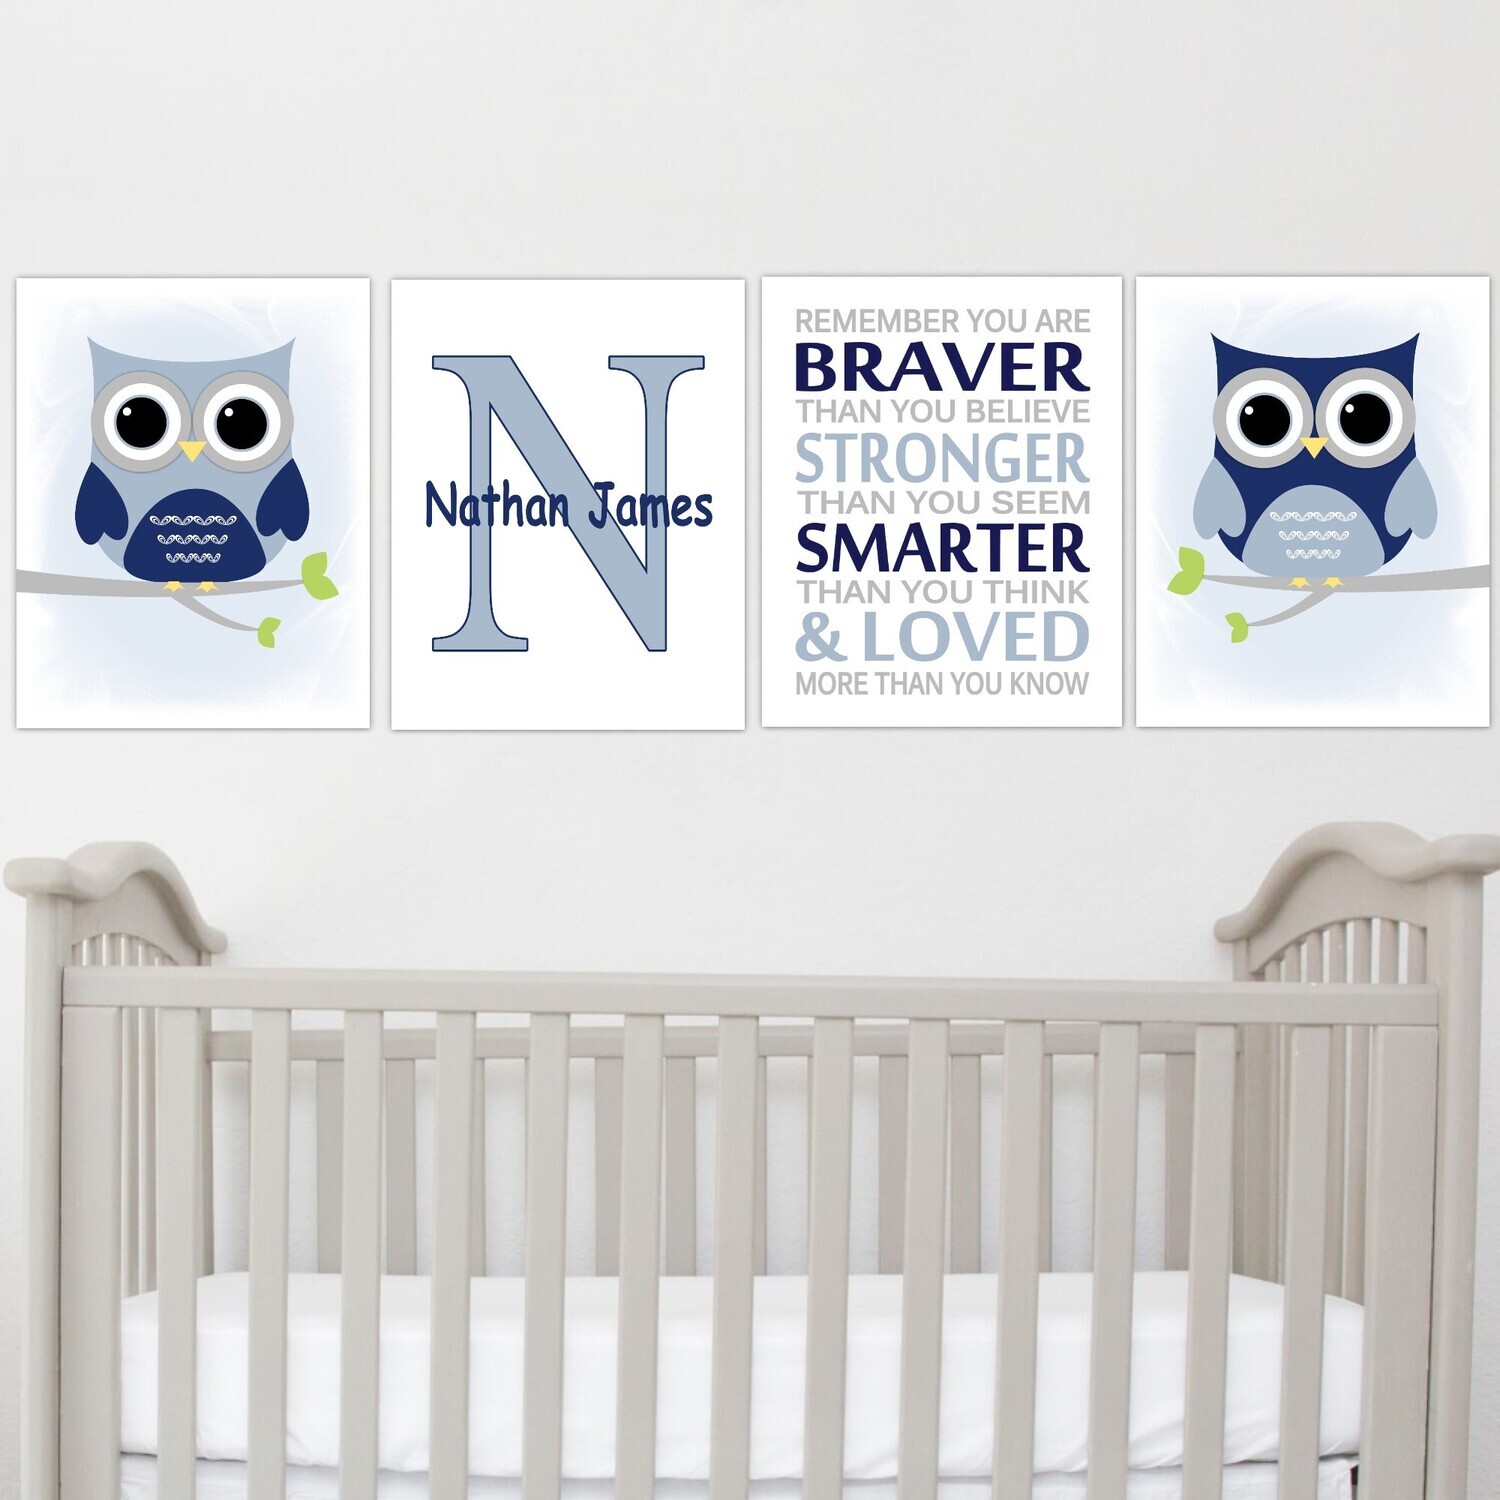 Baby Boy Nursery Wall Art Navy Blue Gray Owls Personalized Remember You Are Braver Stronger Smarter Loved Toddler Boy Room SET OF 4 UNFRAMED PRINTS